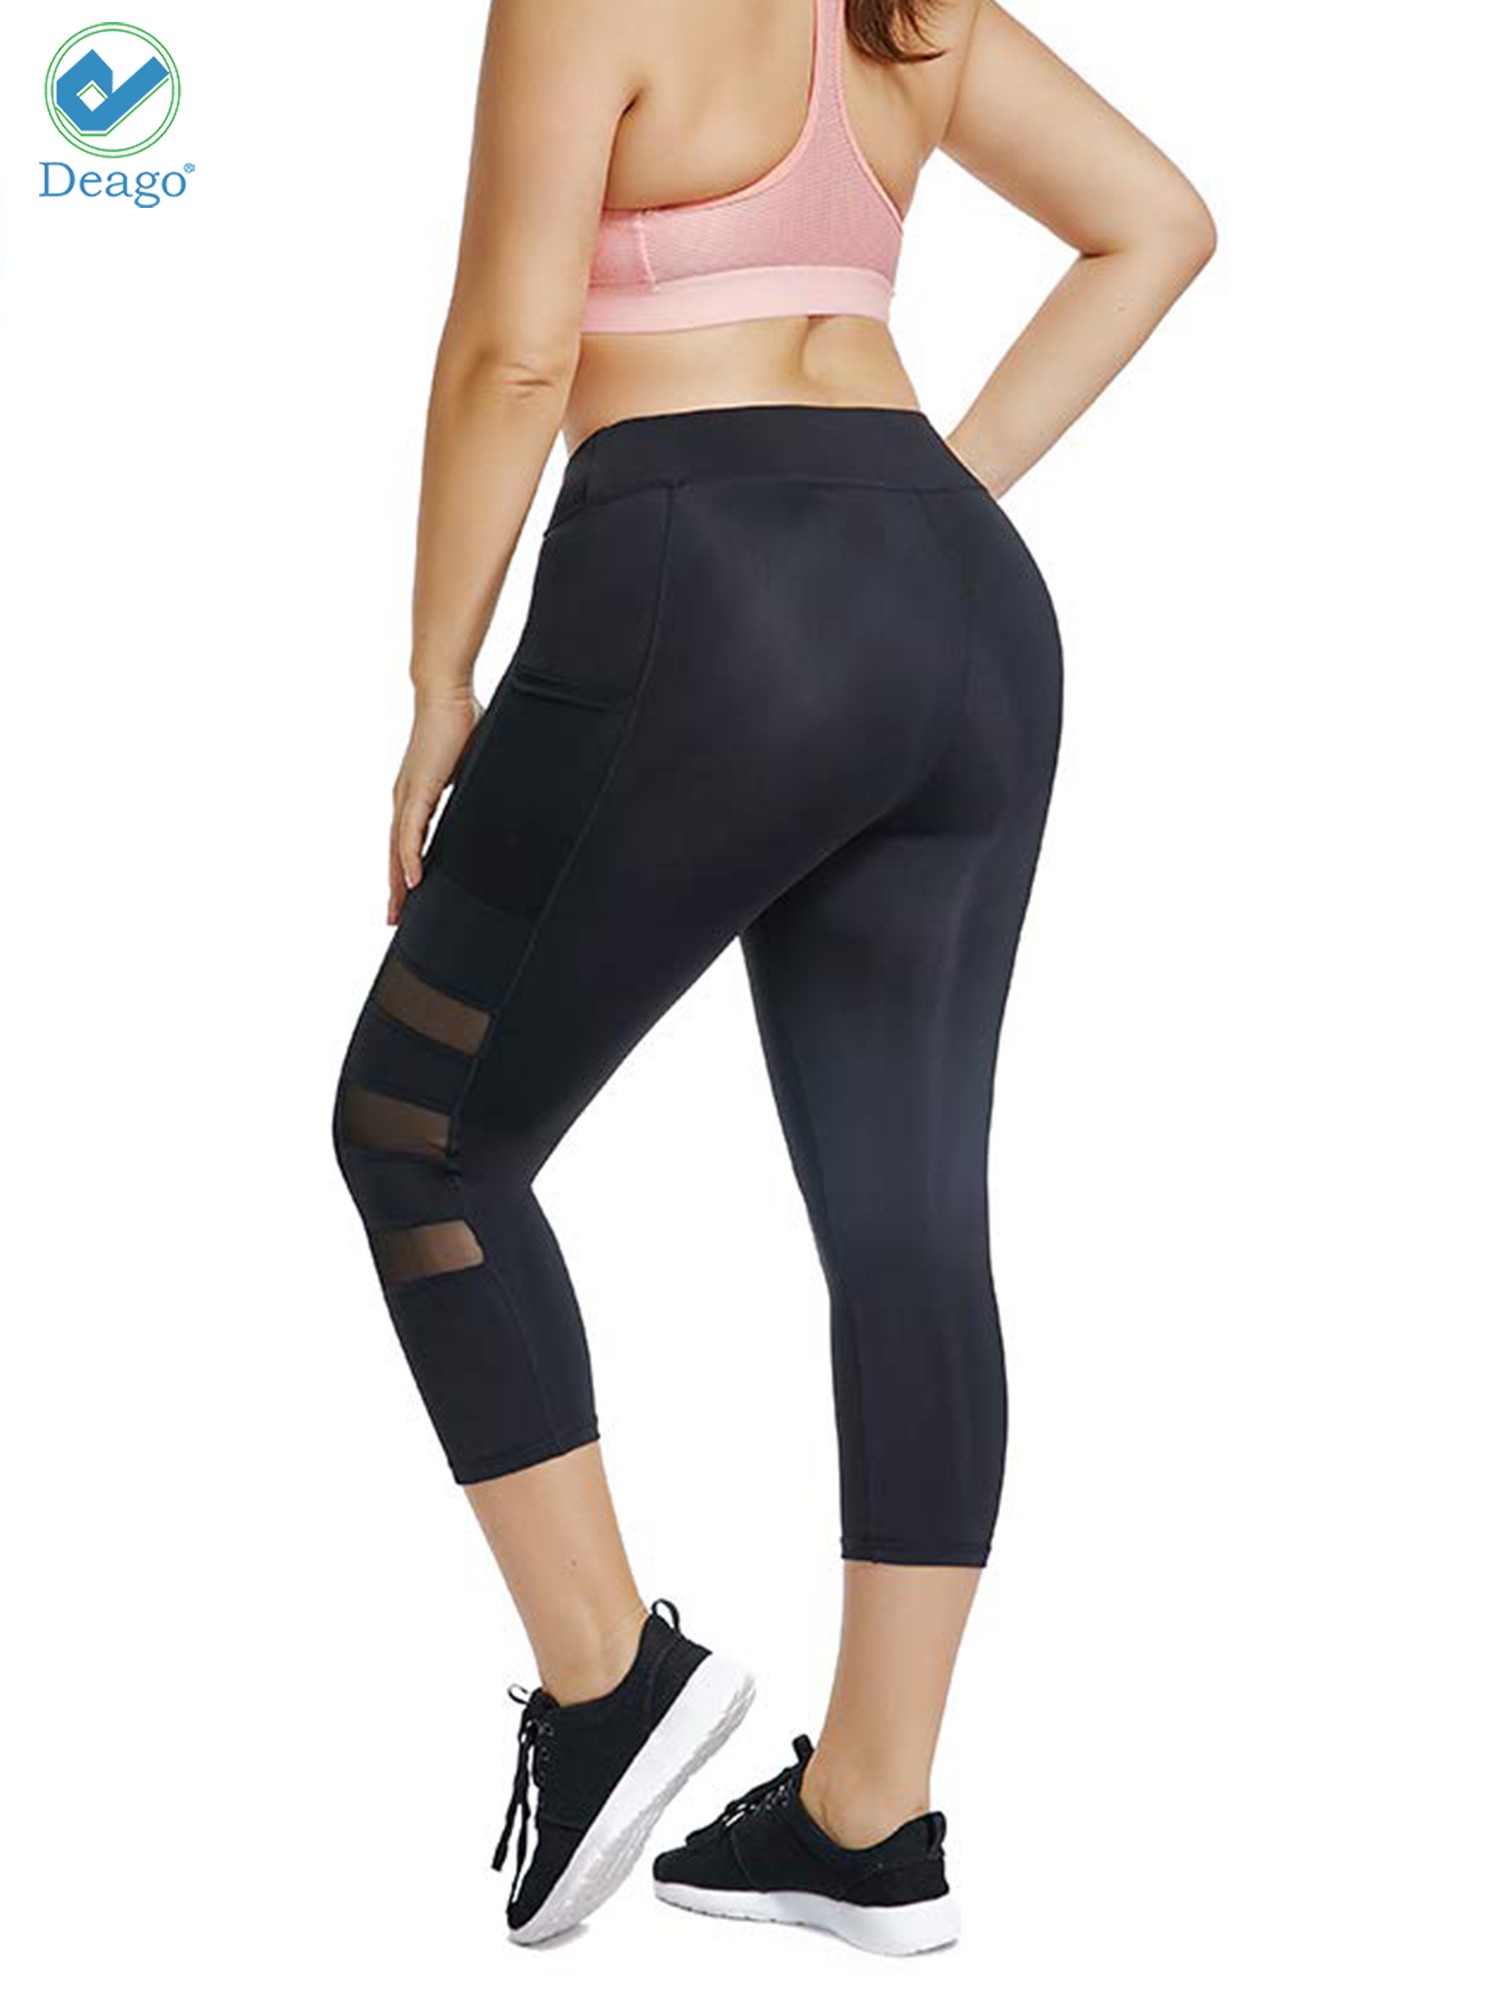 Deago Women's High Waist Yoga Pants Capri with Side Pockets Tummy Control Workout Running 4 Way Stretch Sports Leggings - image 4 of 8